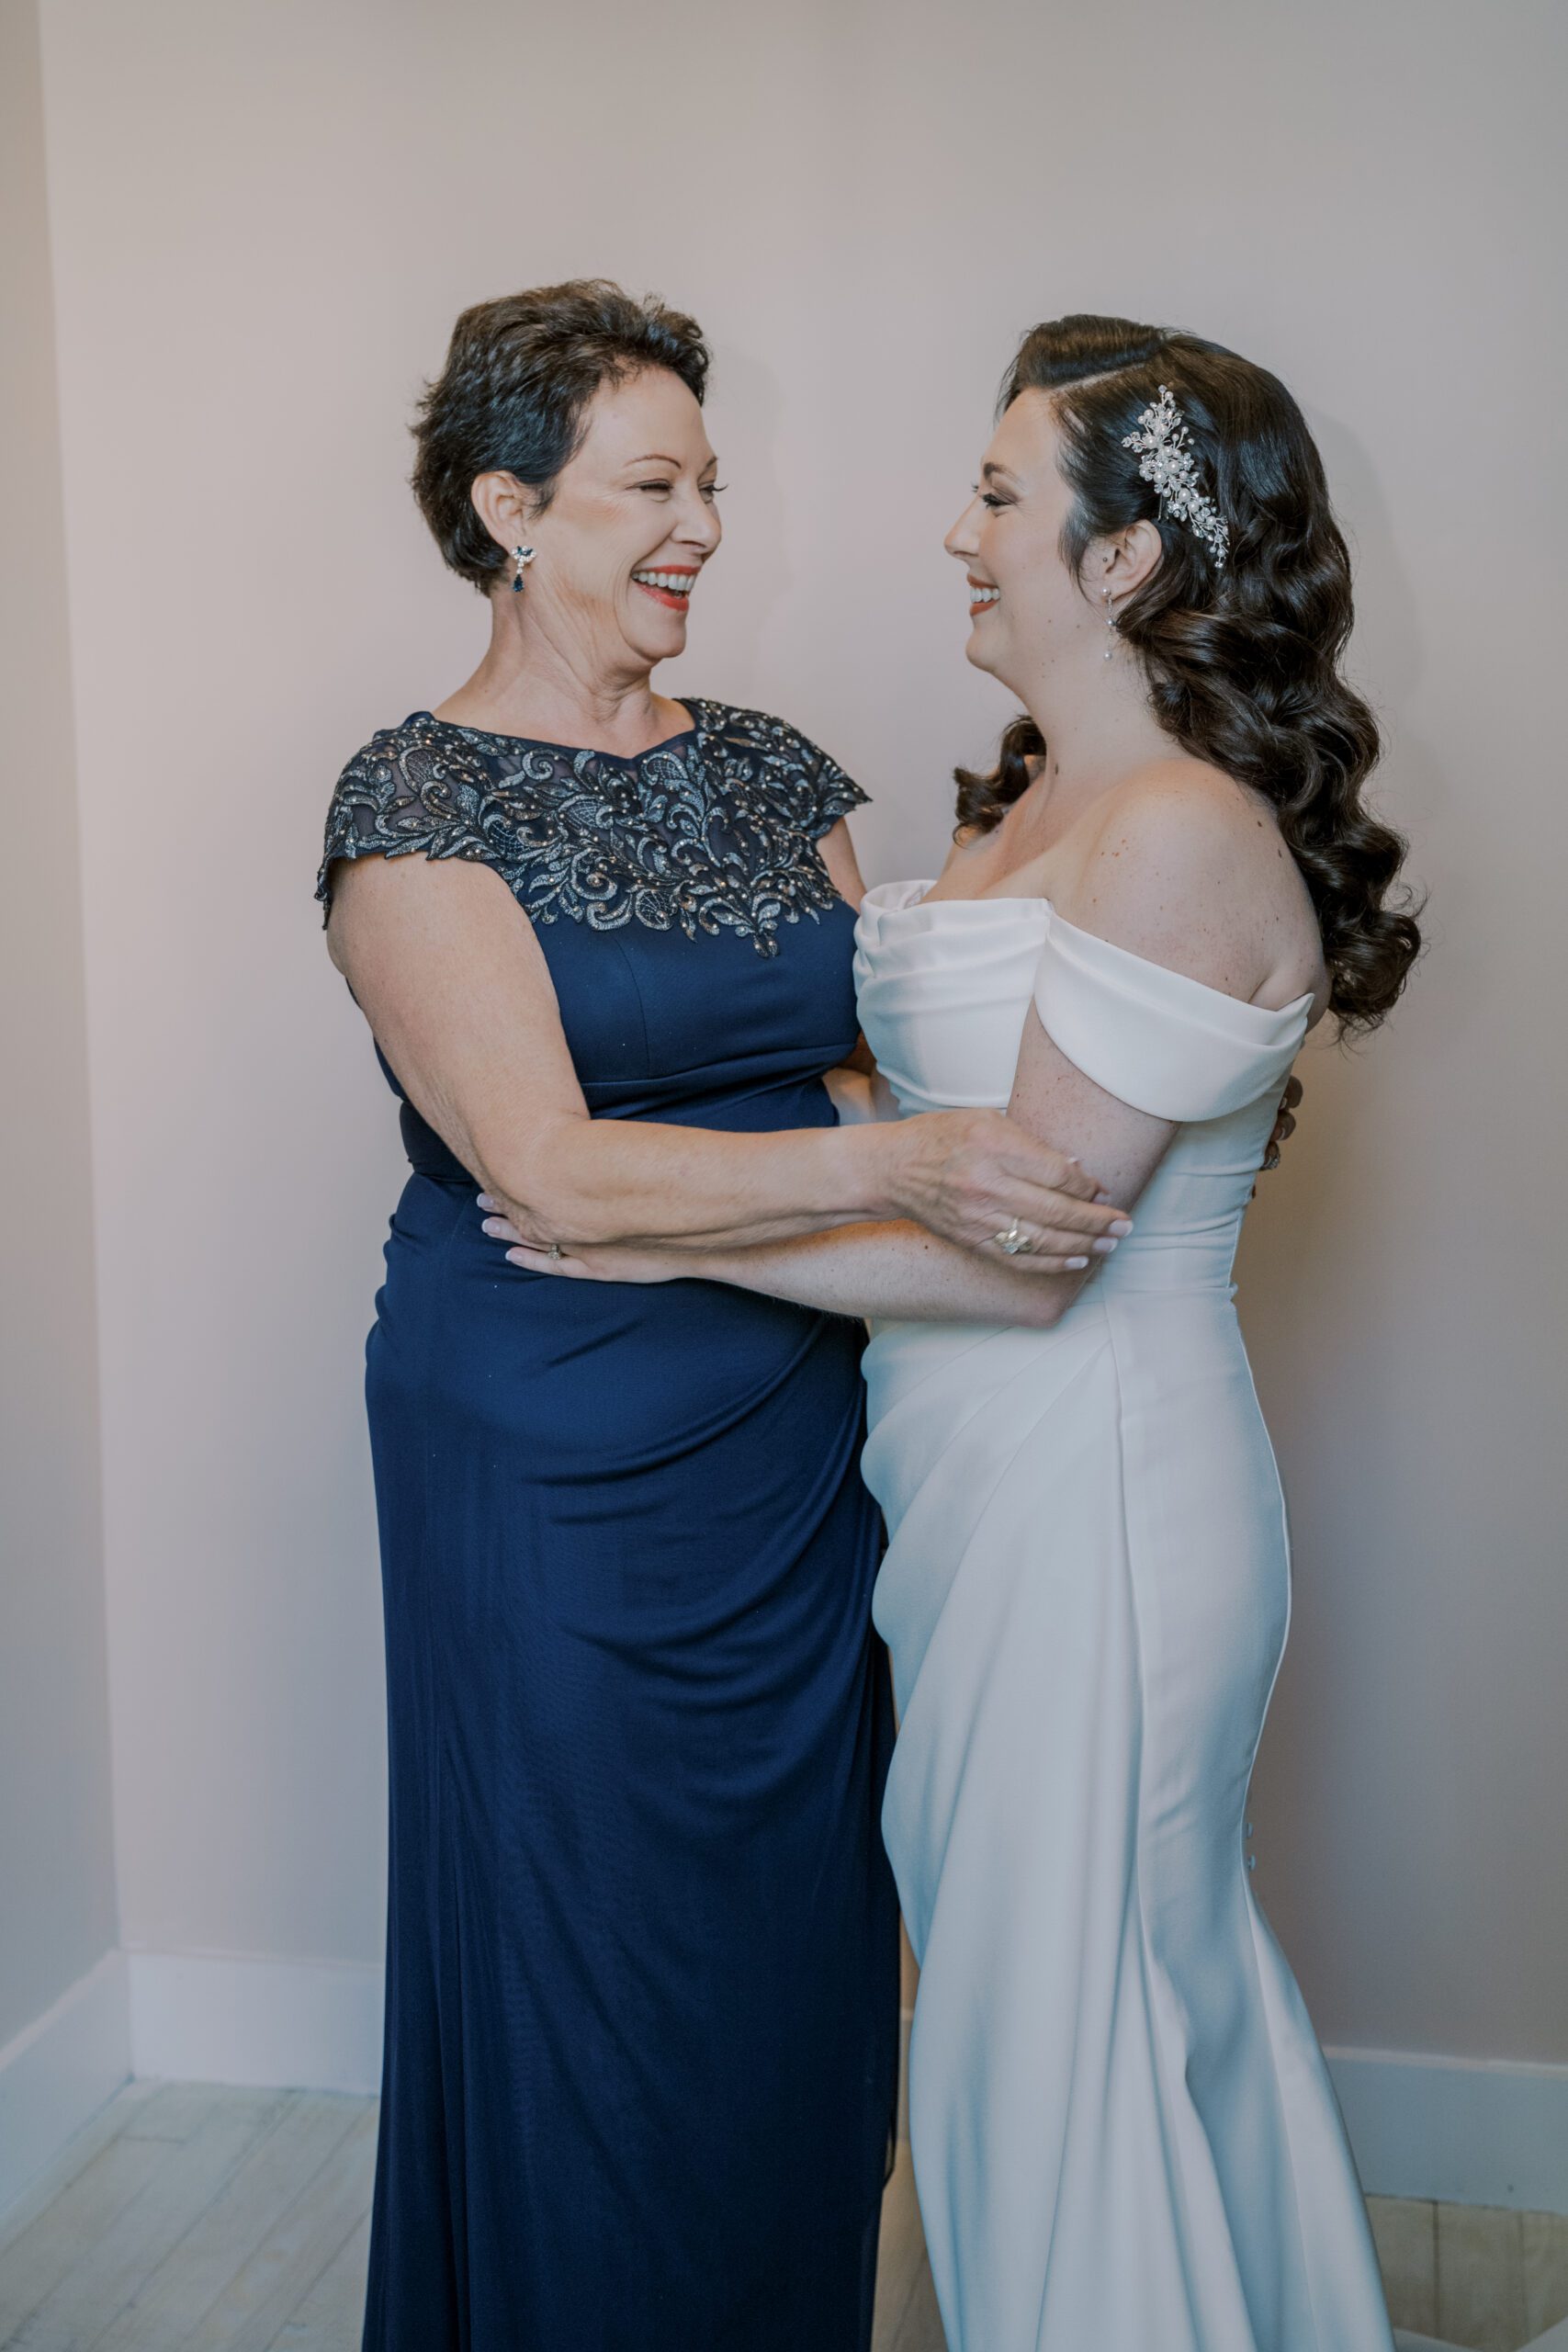 Bride and her mother who is wearing a blue dress with beading around the chest and shoulders, smiling at one another